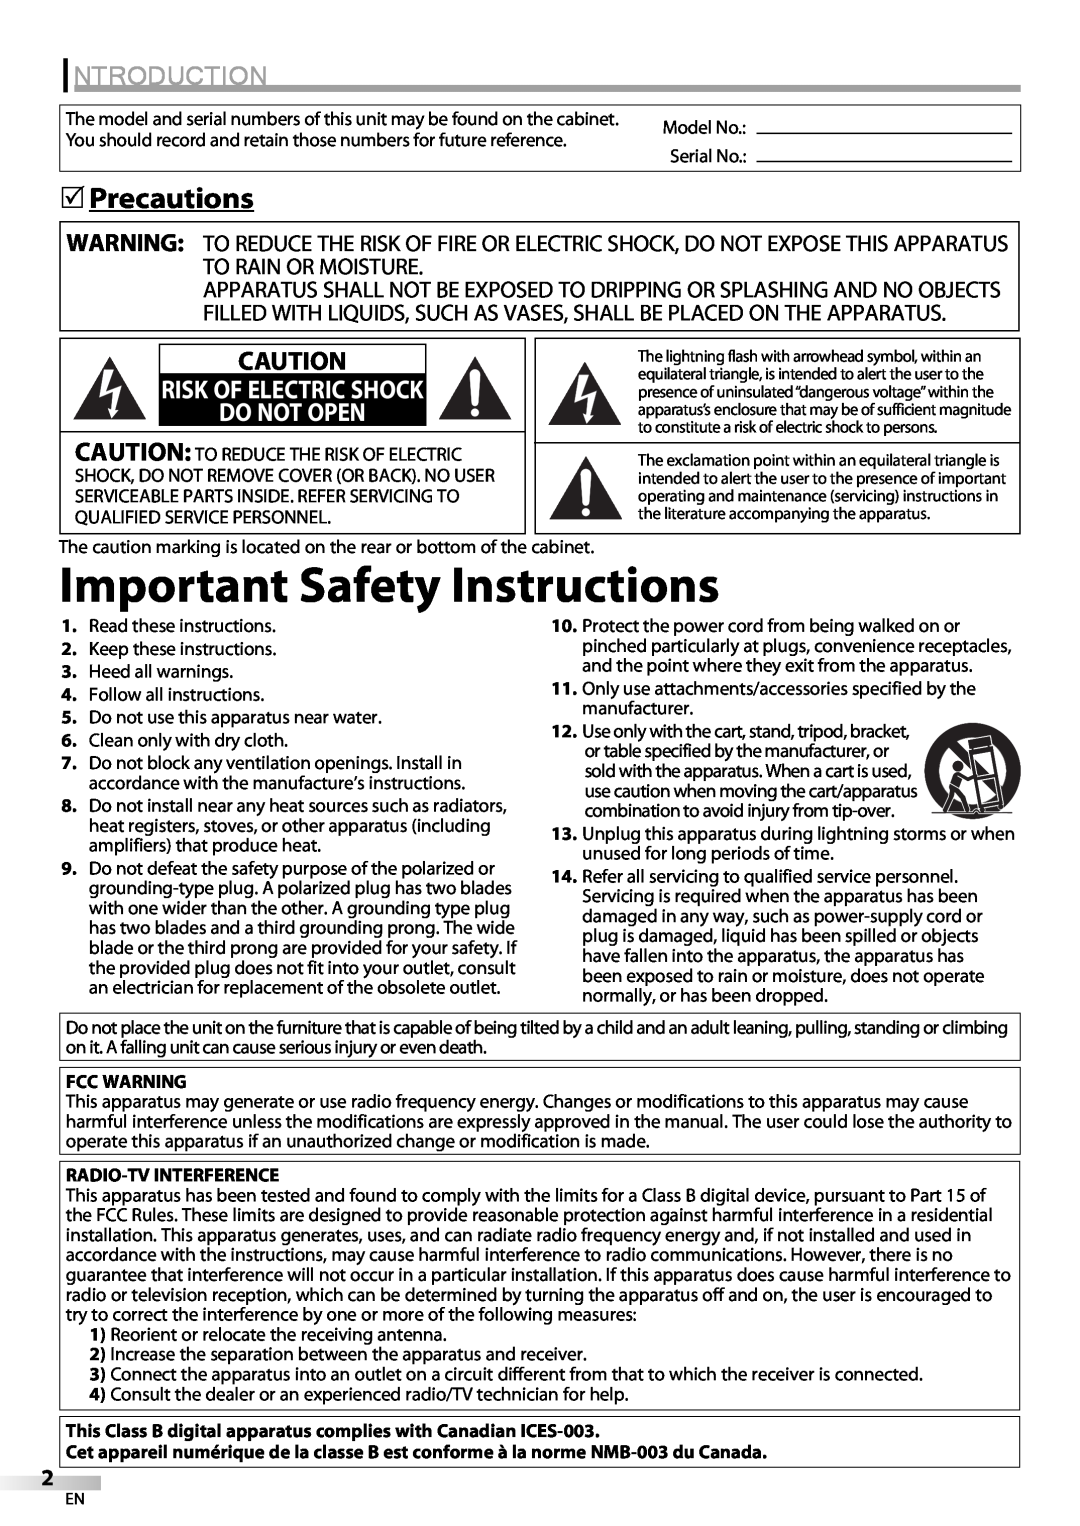 Sylvania LC225SC9 Important Safety Instructions, Introduction, Precautions, Do Not Open, Risk Of Electric Shock 